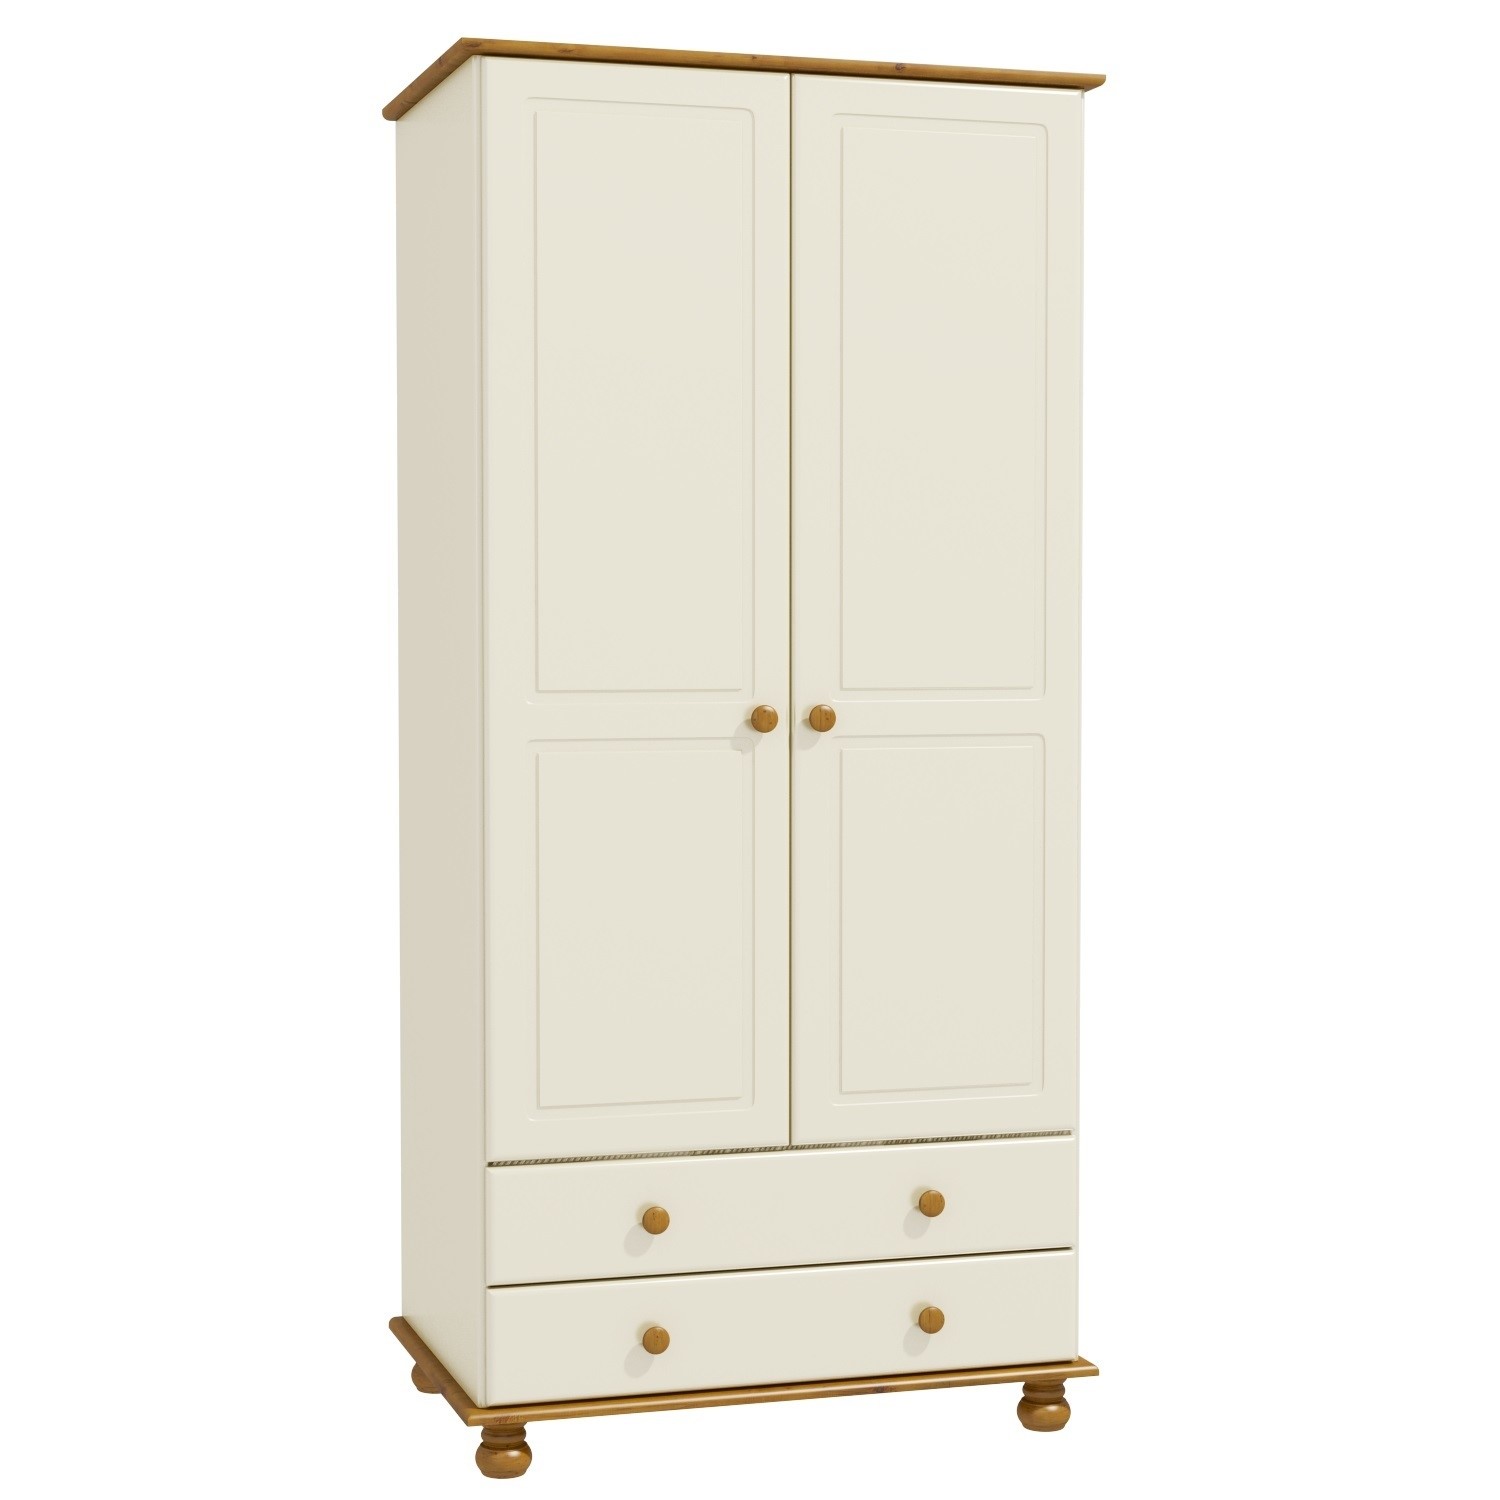 Read more about Cream and pine painted 2 door double wardrobe with drawers hamilton